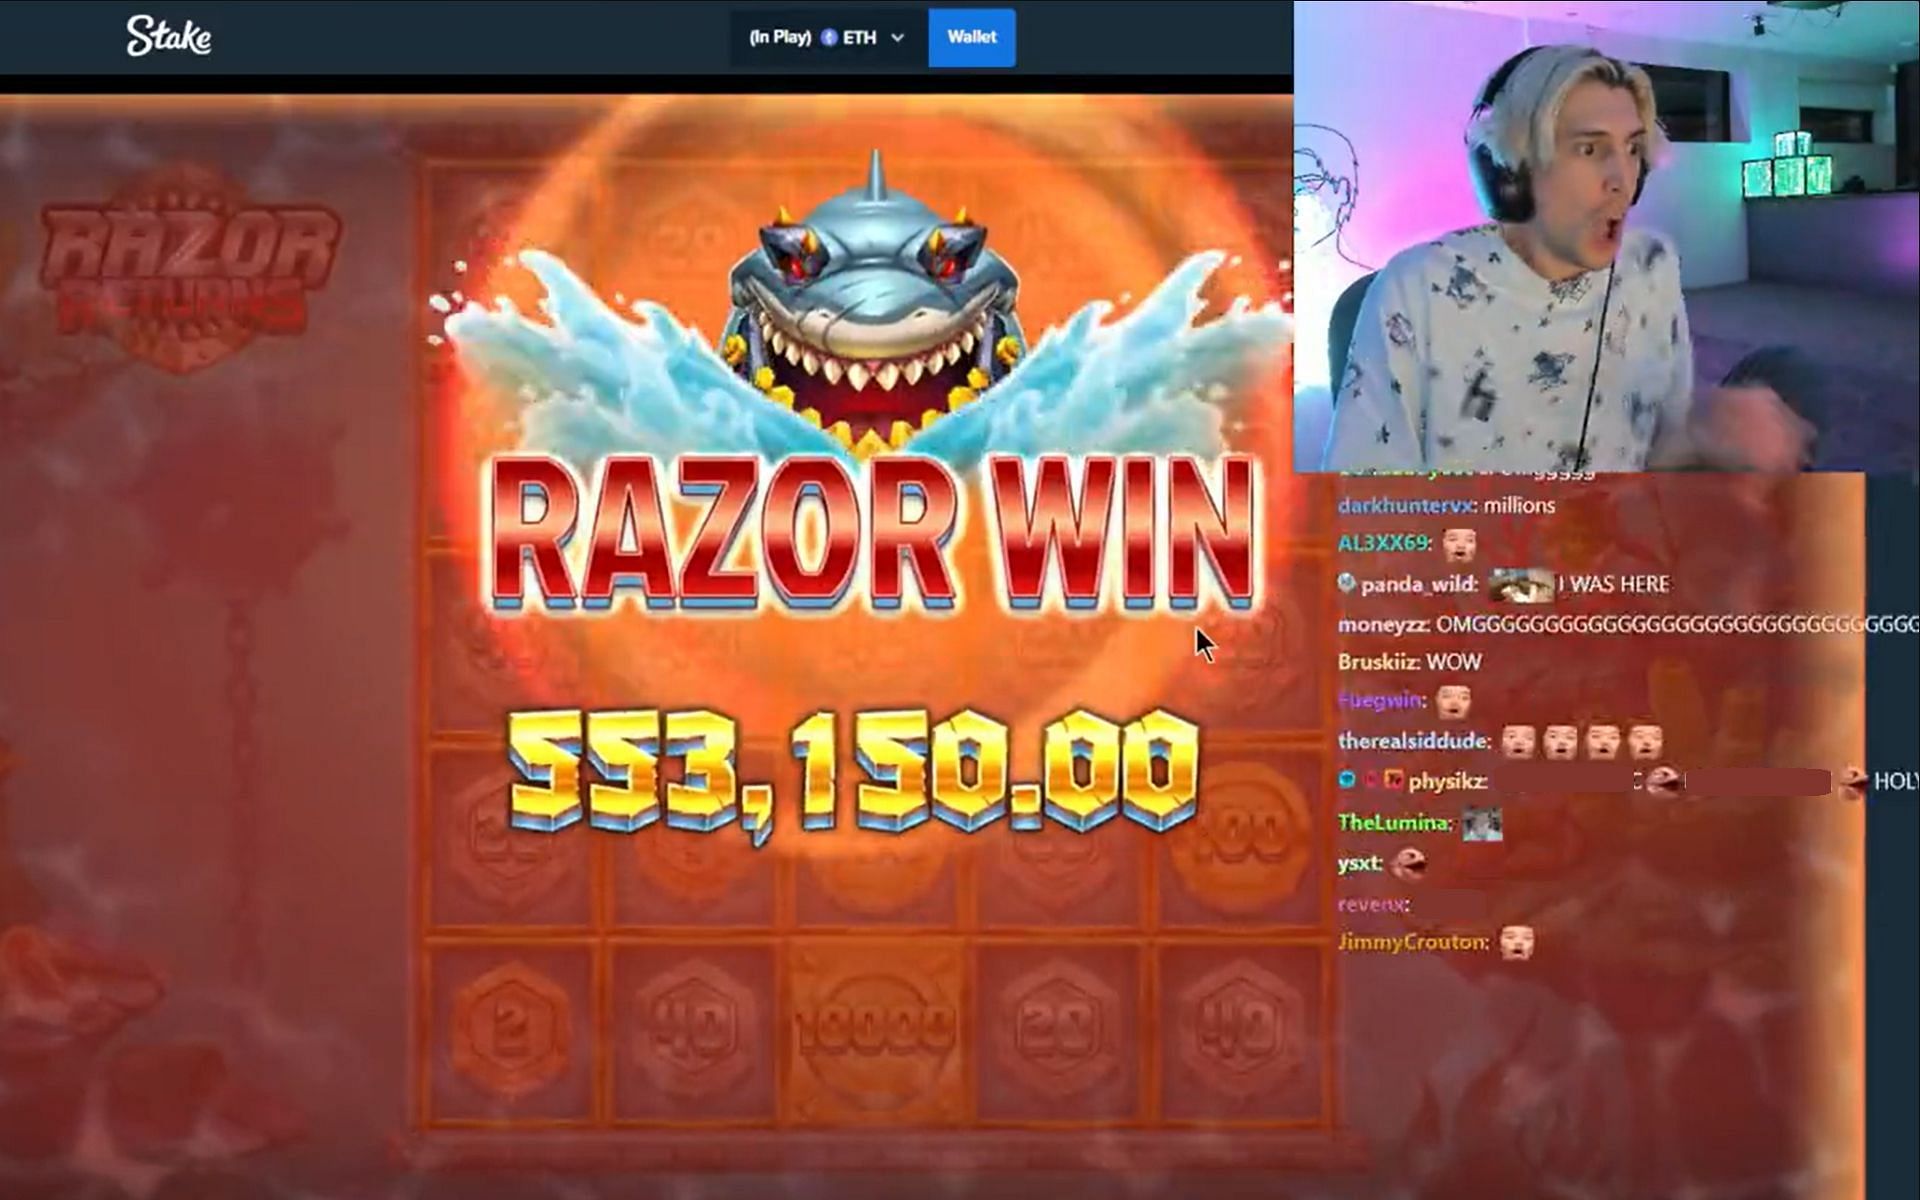 xQc managed to win over $500,000 during his first Stake sponsored gambling livestream, fans react (Image via xQc/Kick)